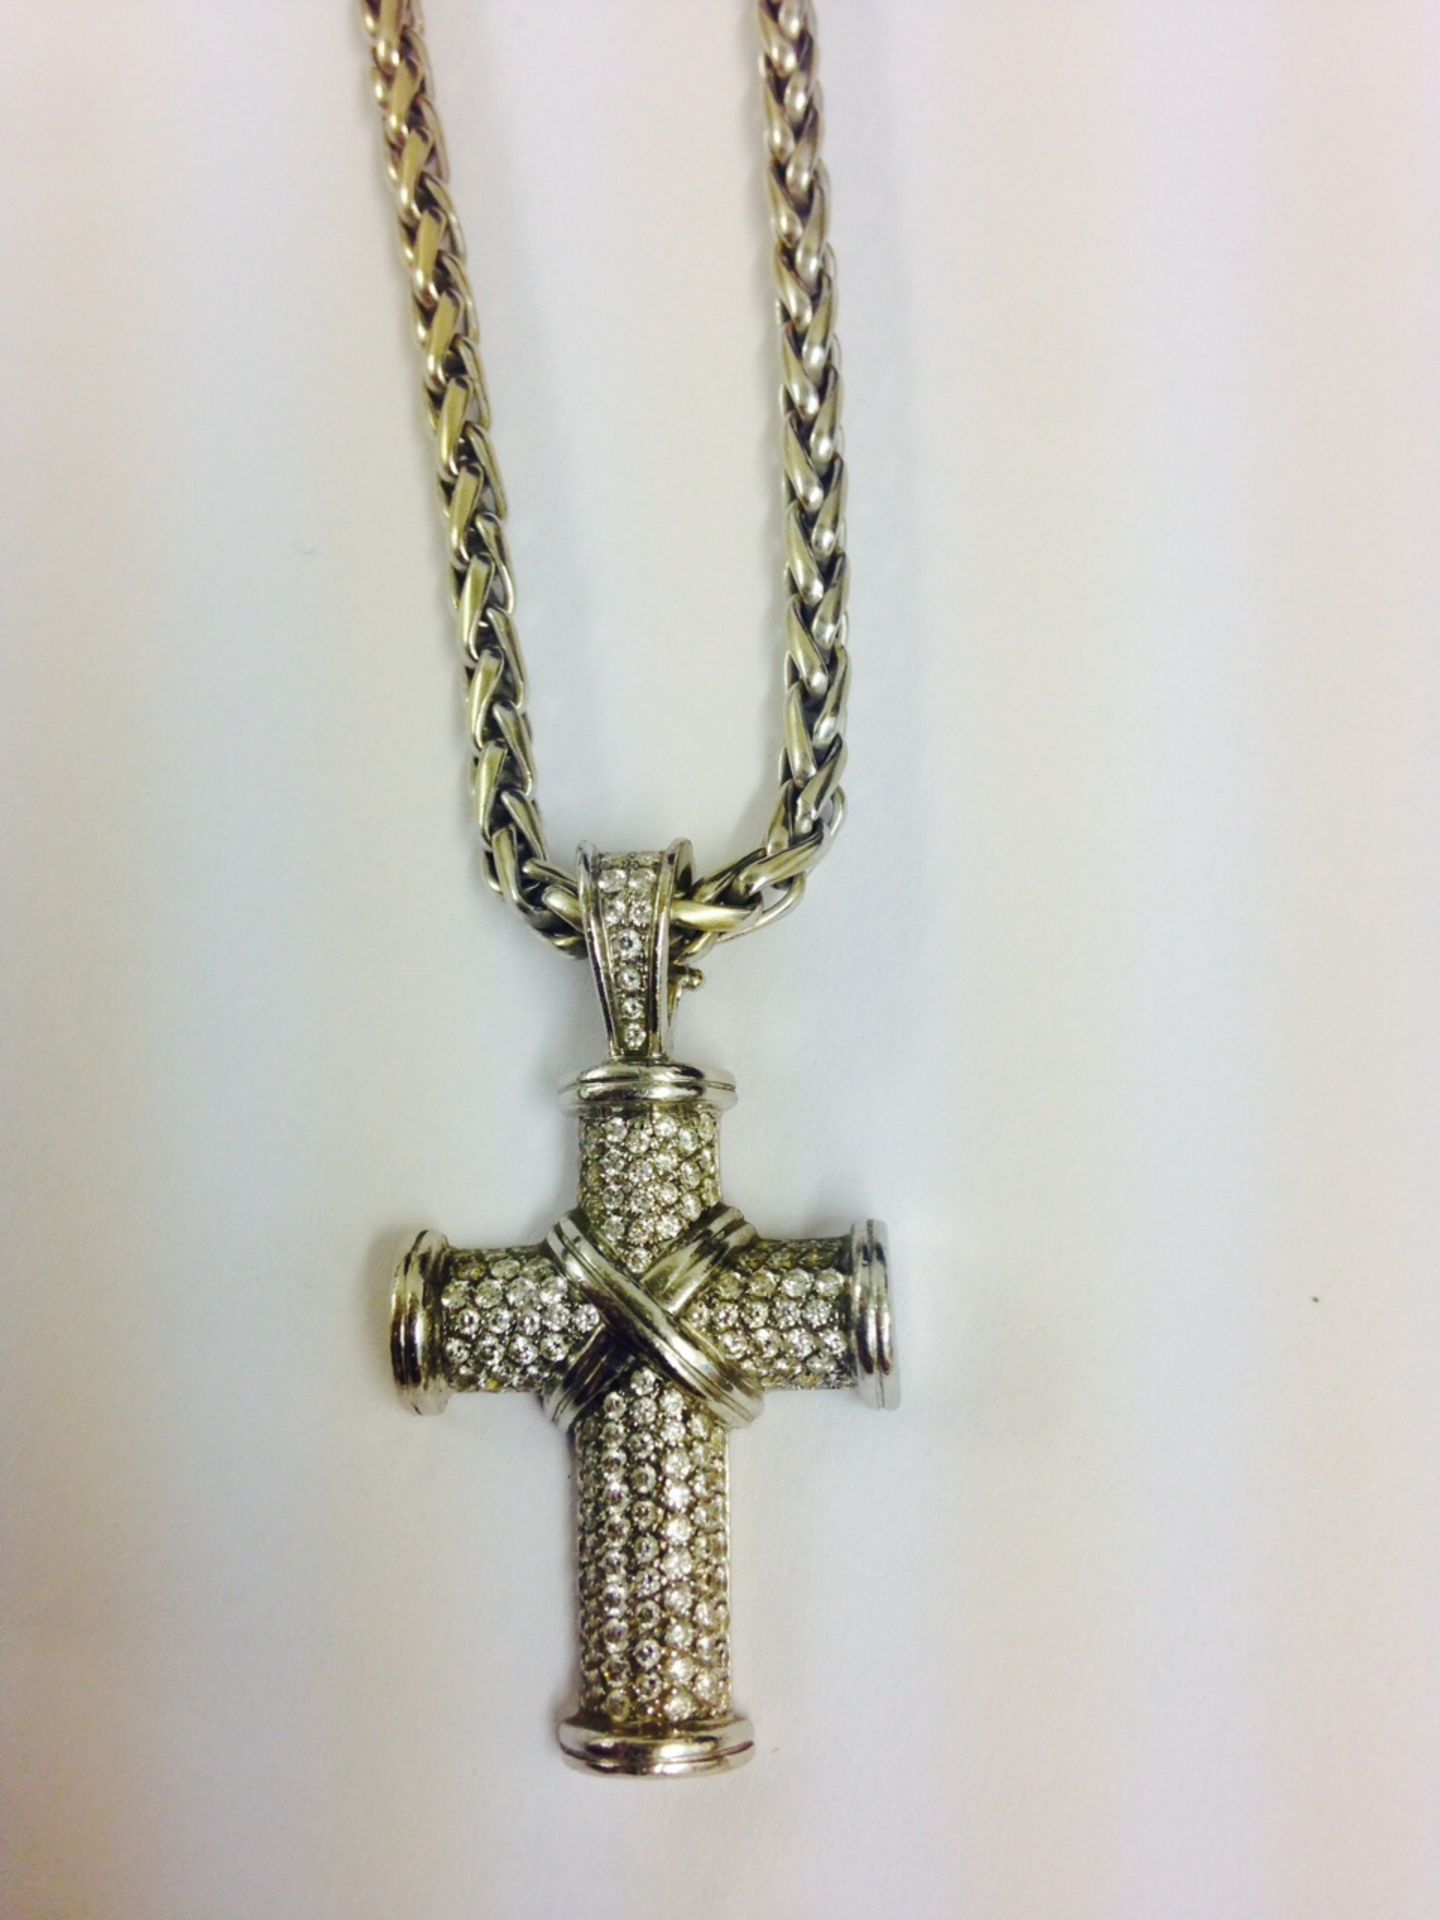 18 carat white gold Theo fennell diamond cross and chain, RRP £10,500.00 - Image 2 of 2